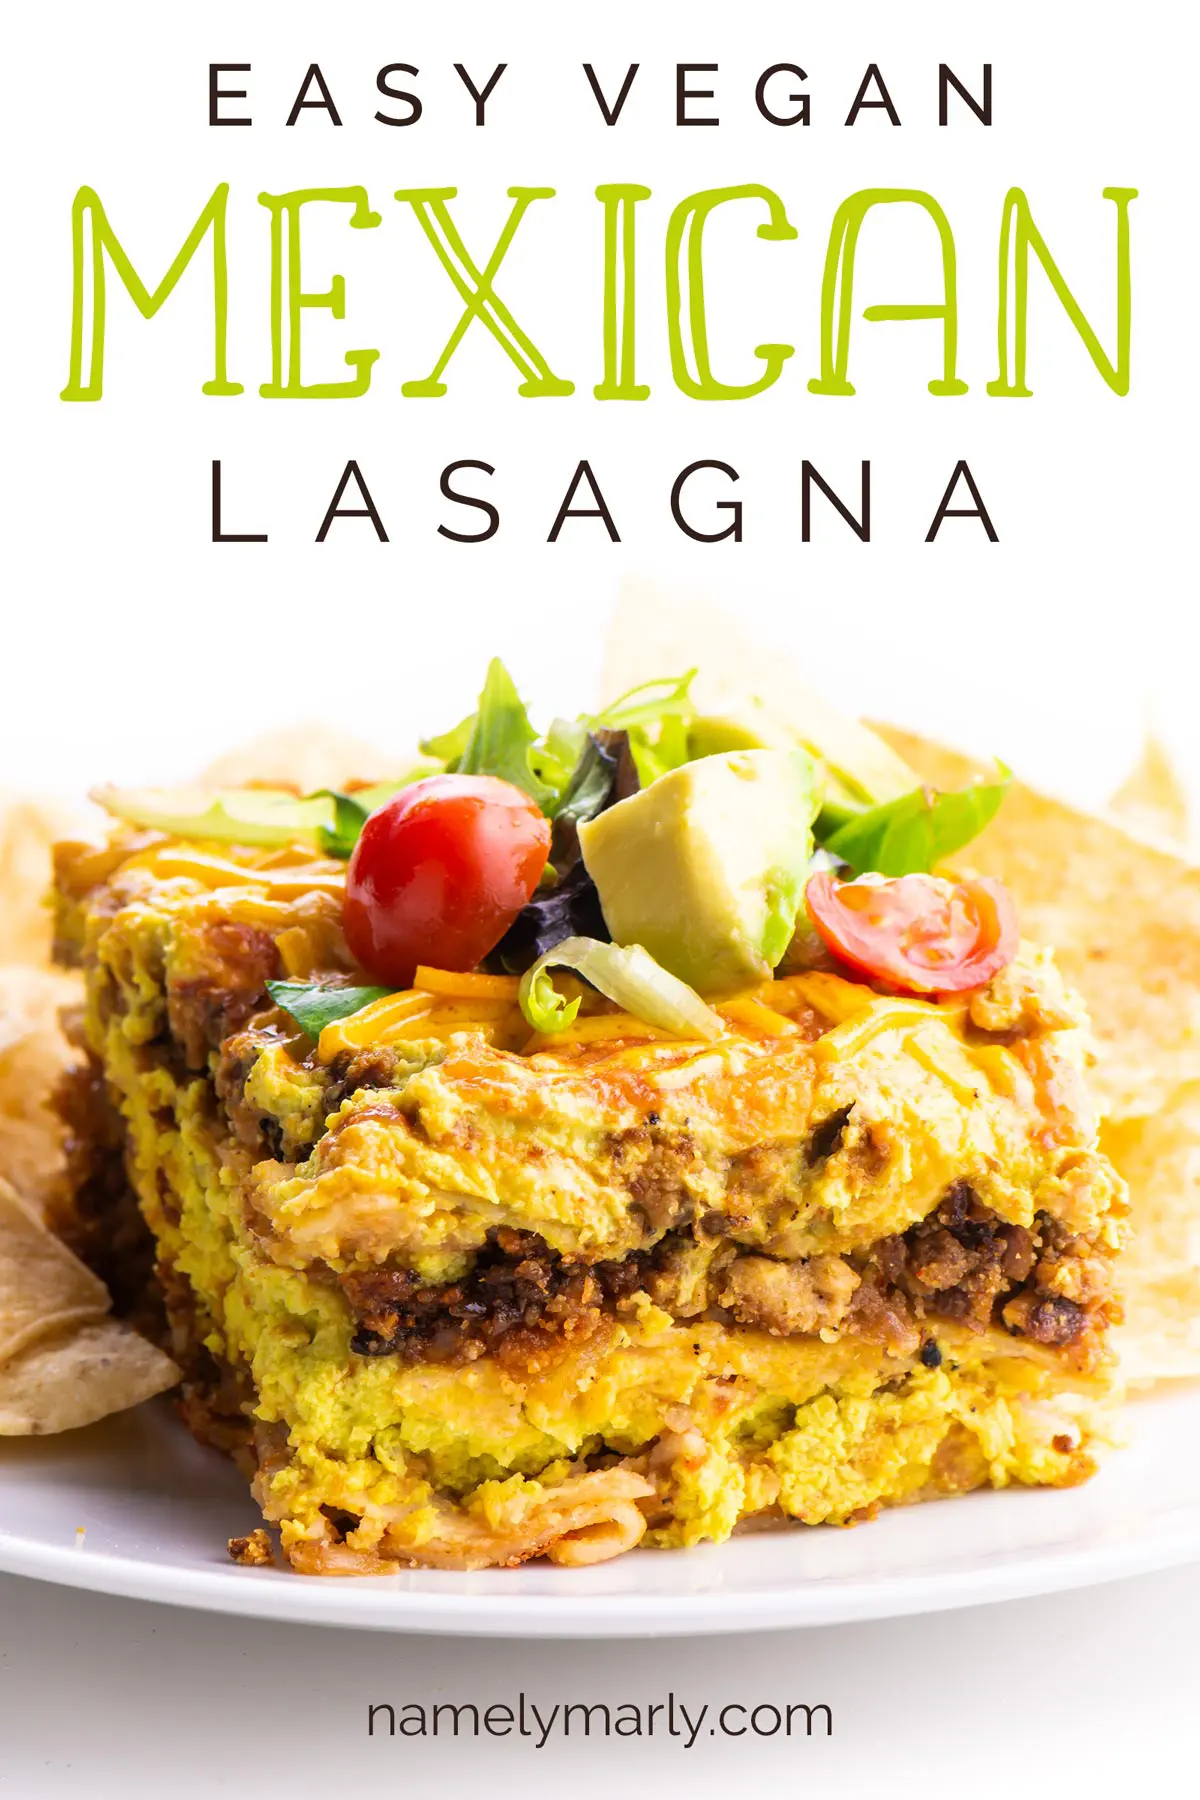 A Mexican entree sits on a plate next to tortilla chips. Text above it reads: Easy Vegan Mexican Lasagna.